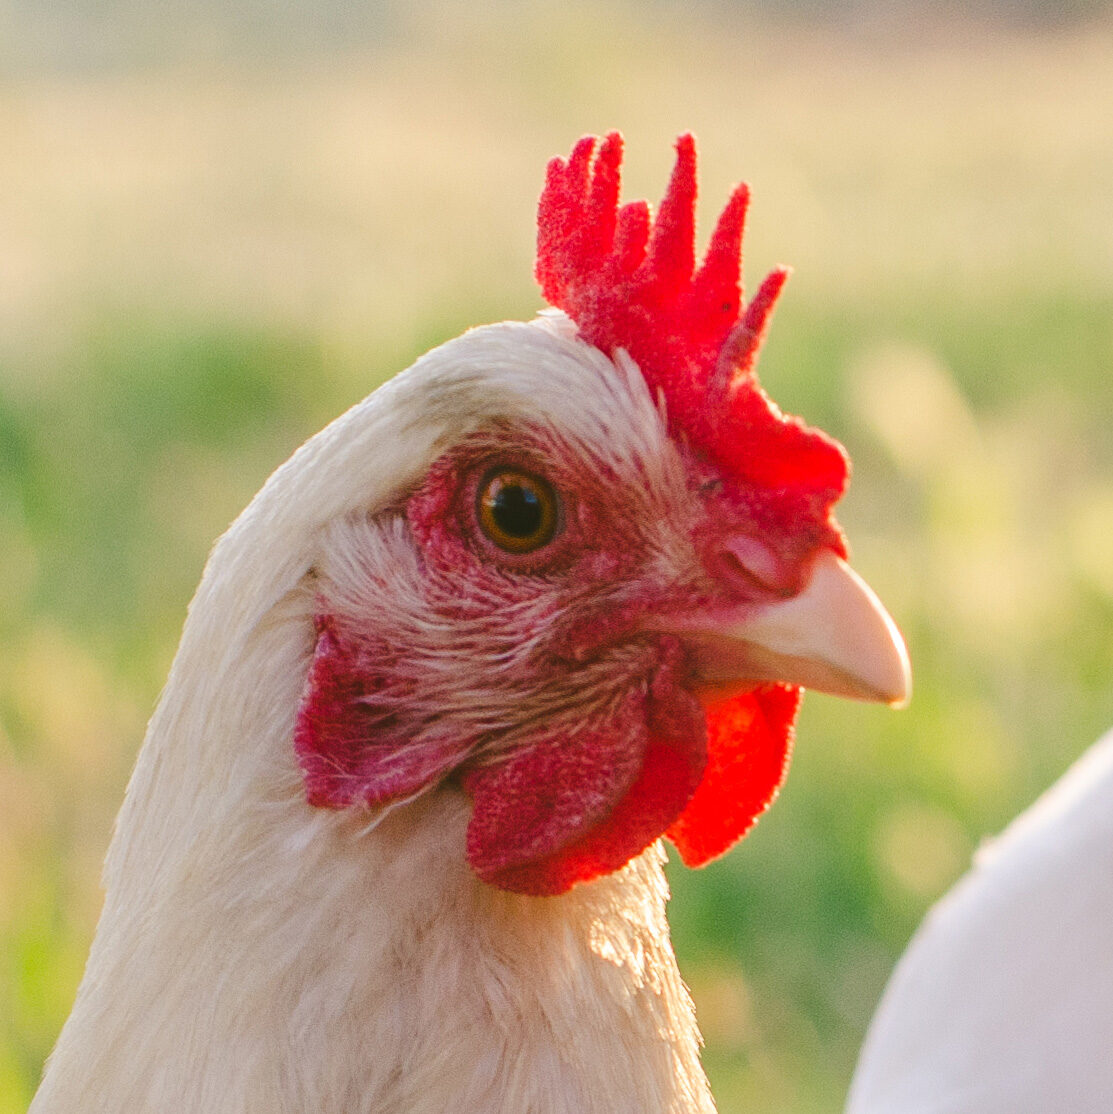 Progress For Chickens Raised For Wingstop | Animal Equality UK